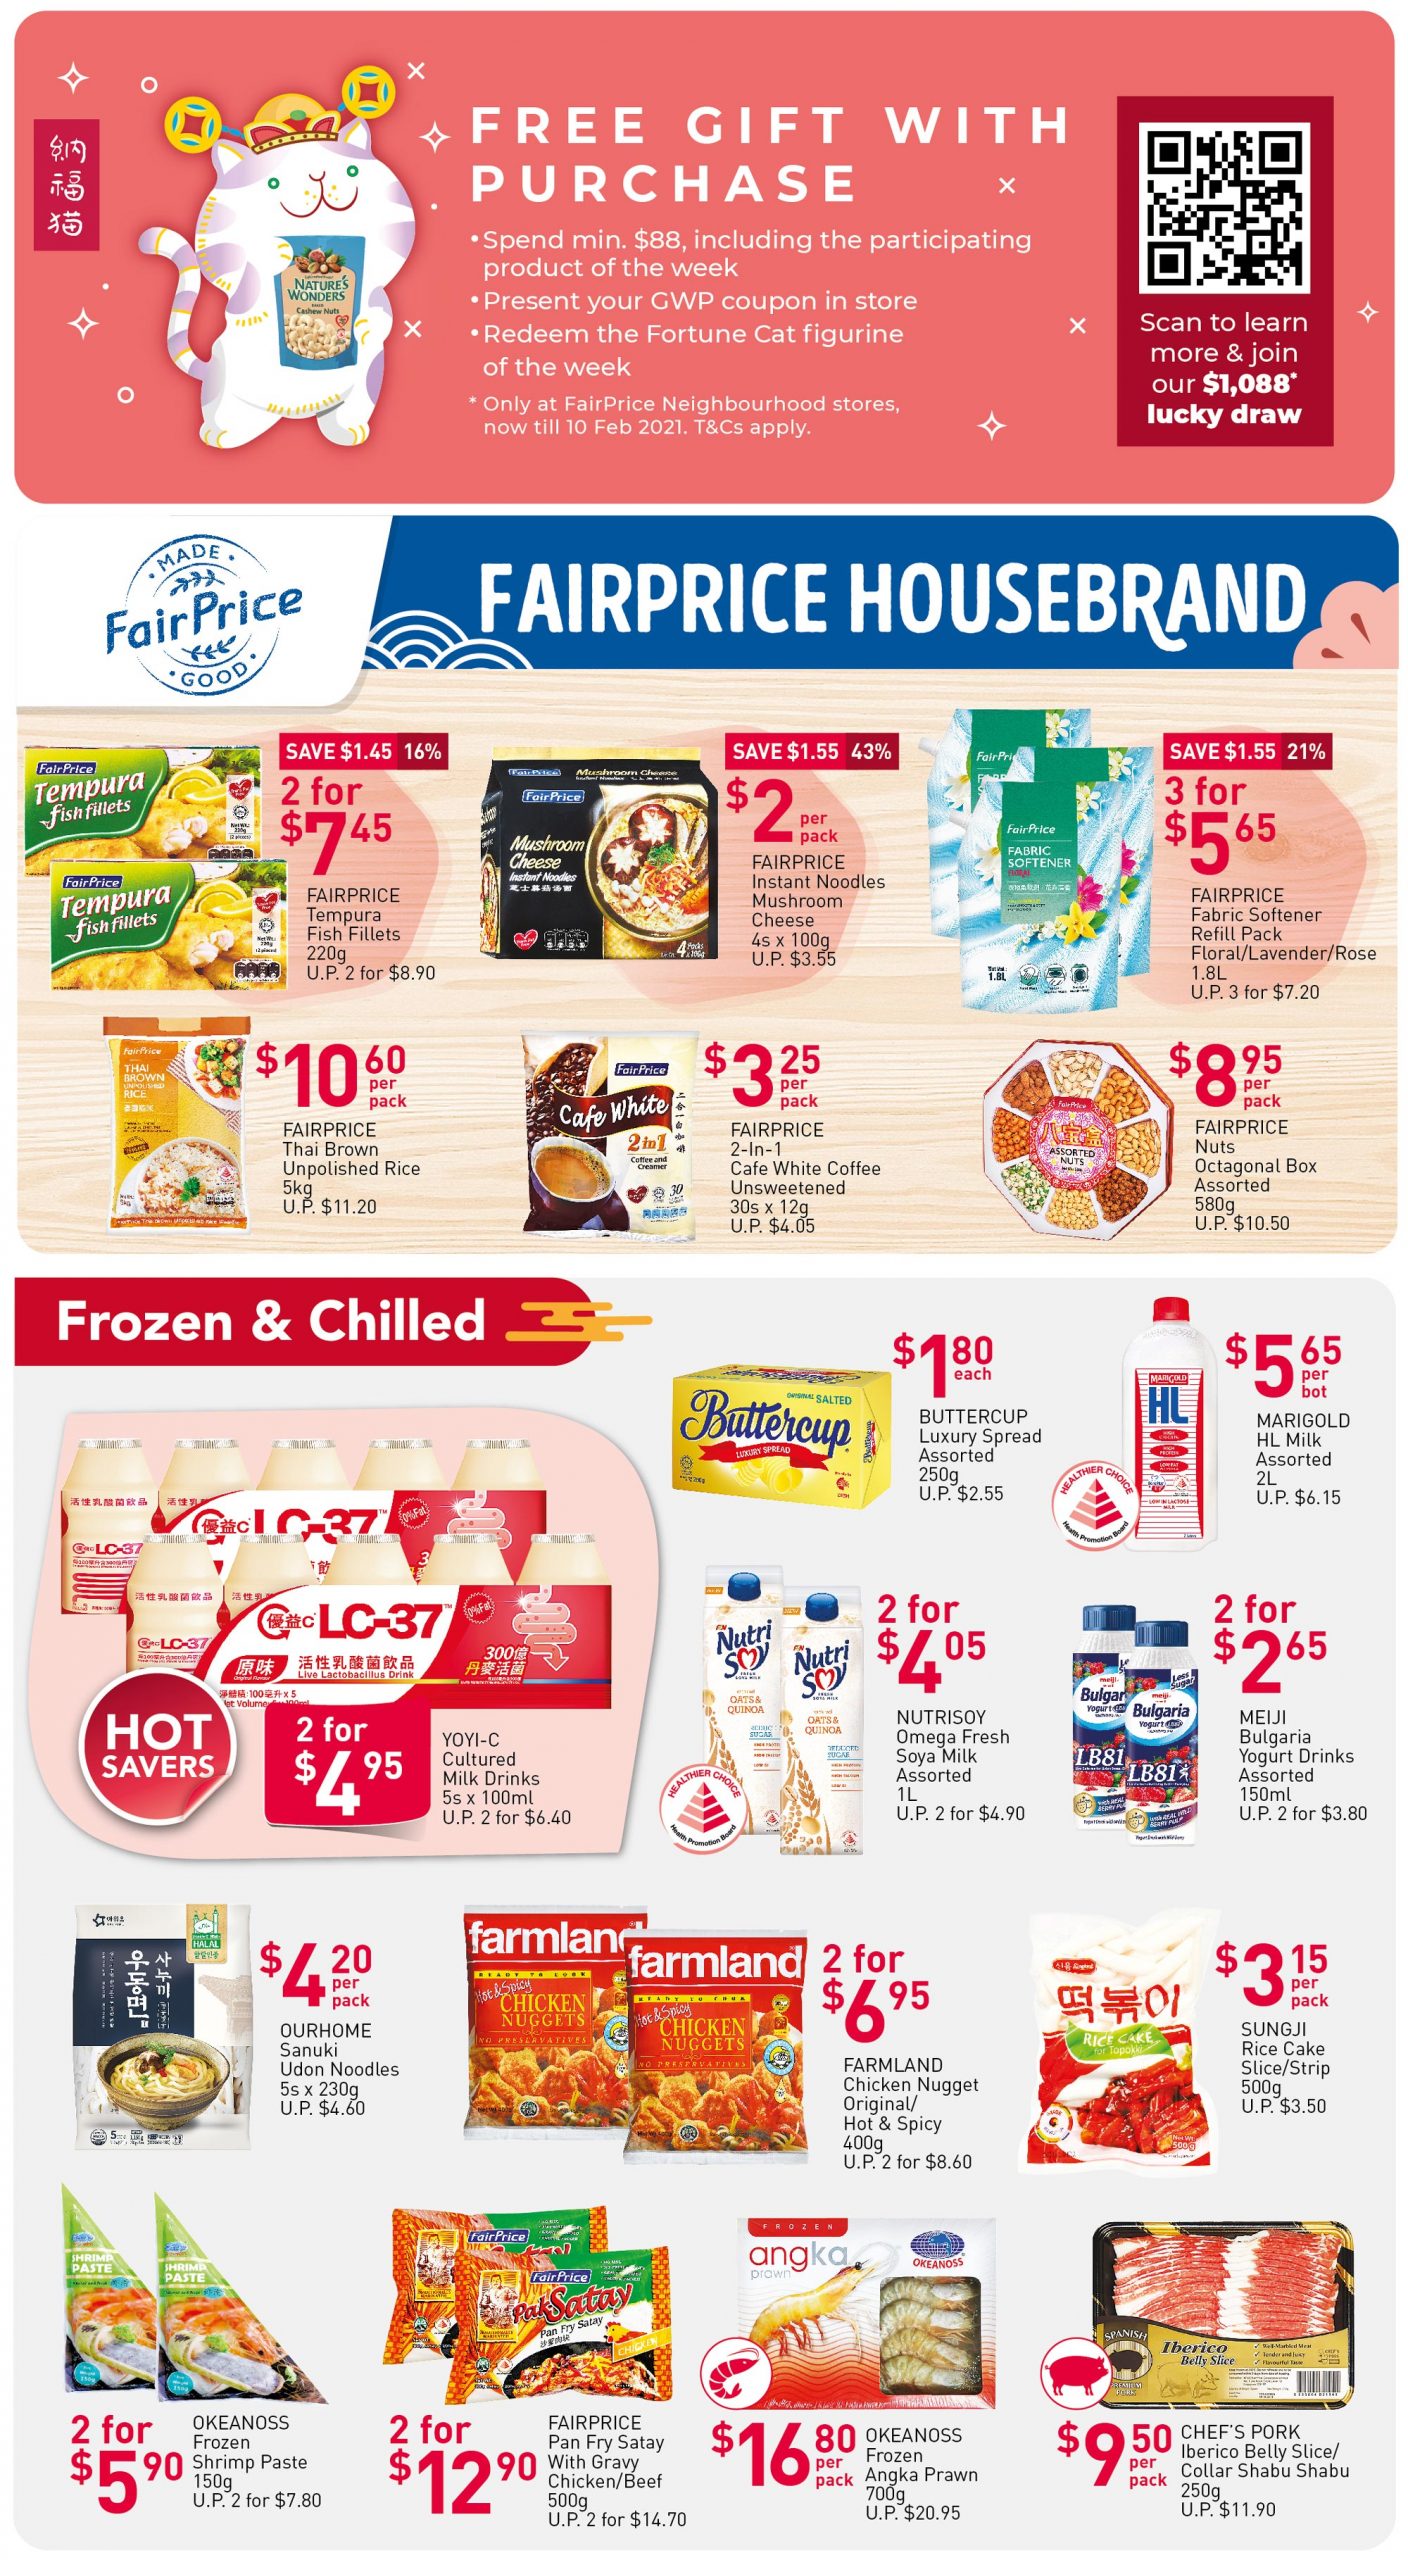 FairPrice’s weekly saver deals till 10 February 2021 (part 2)